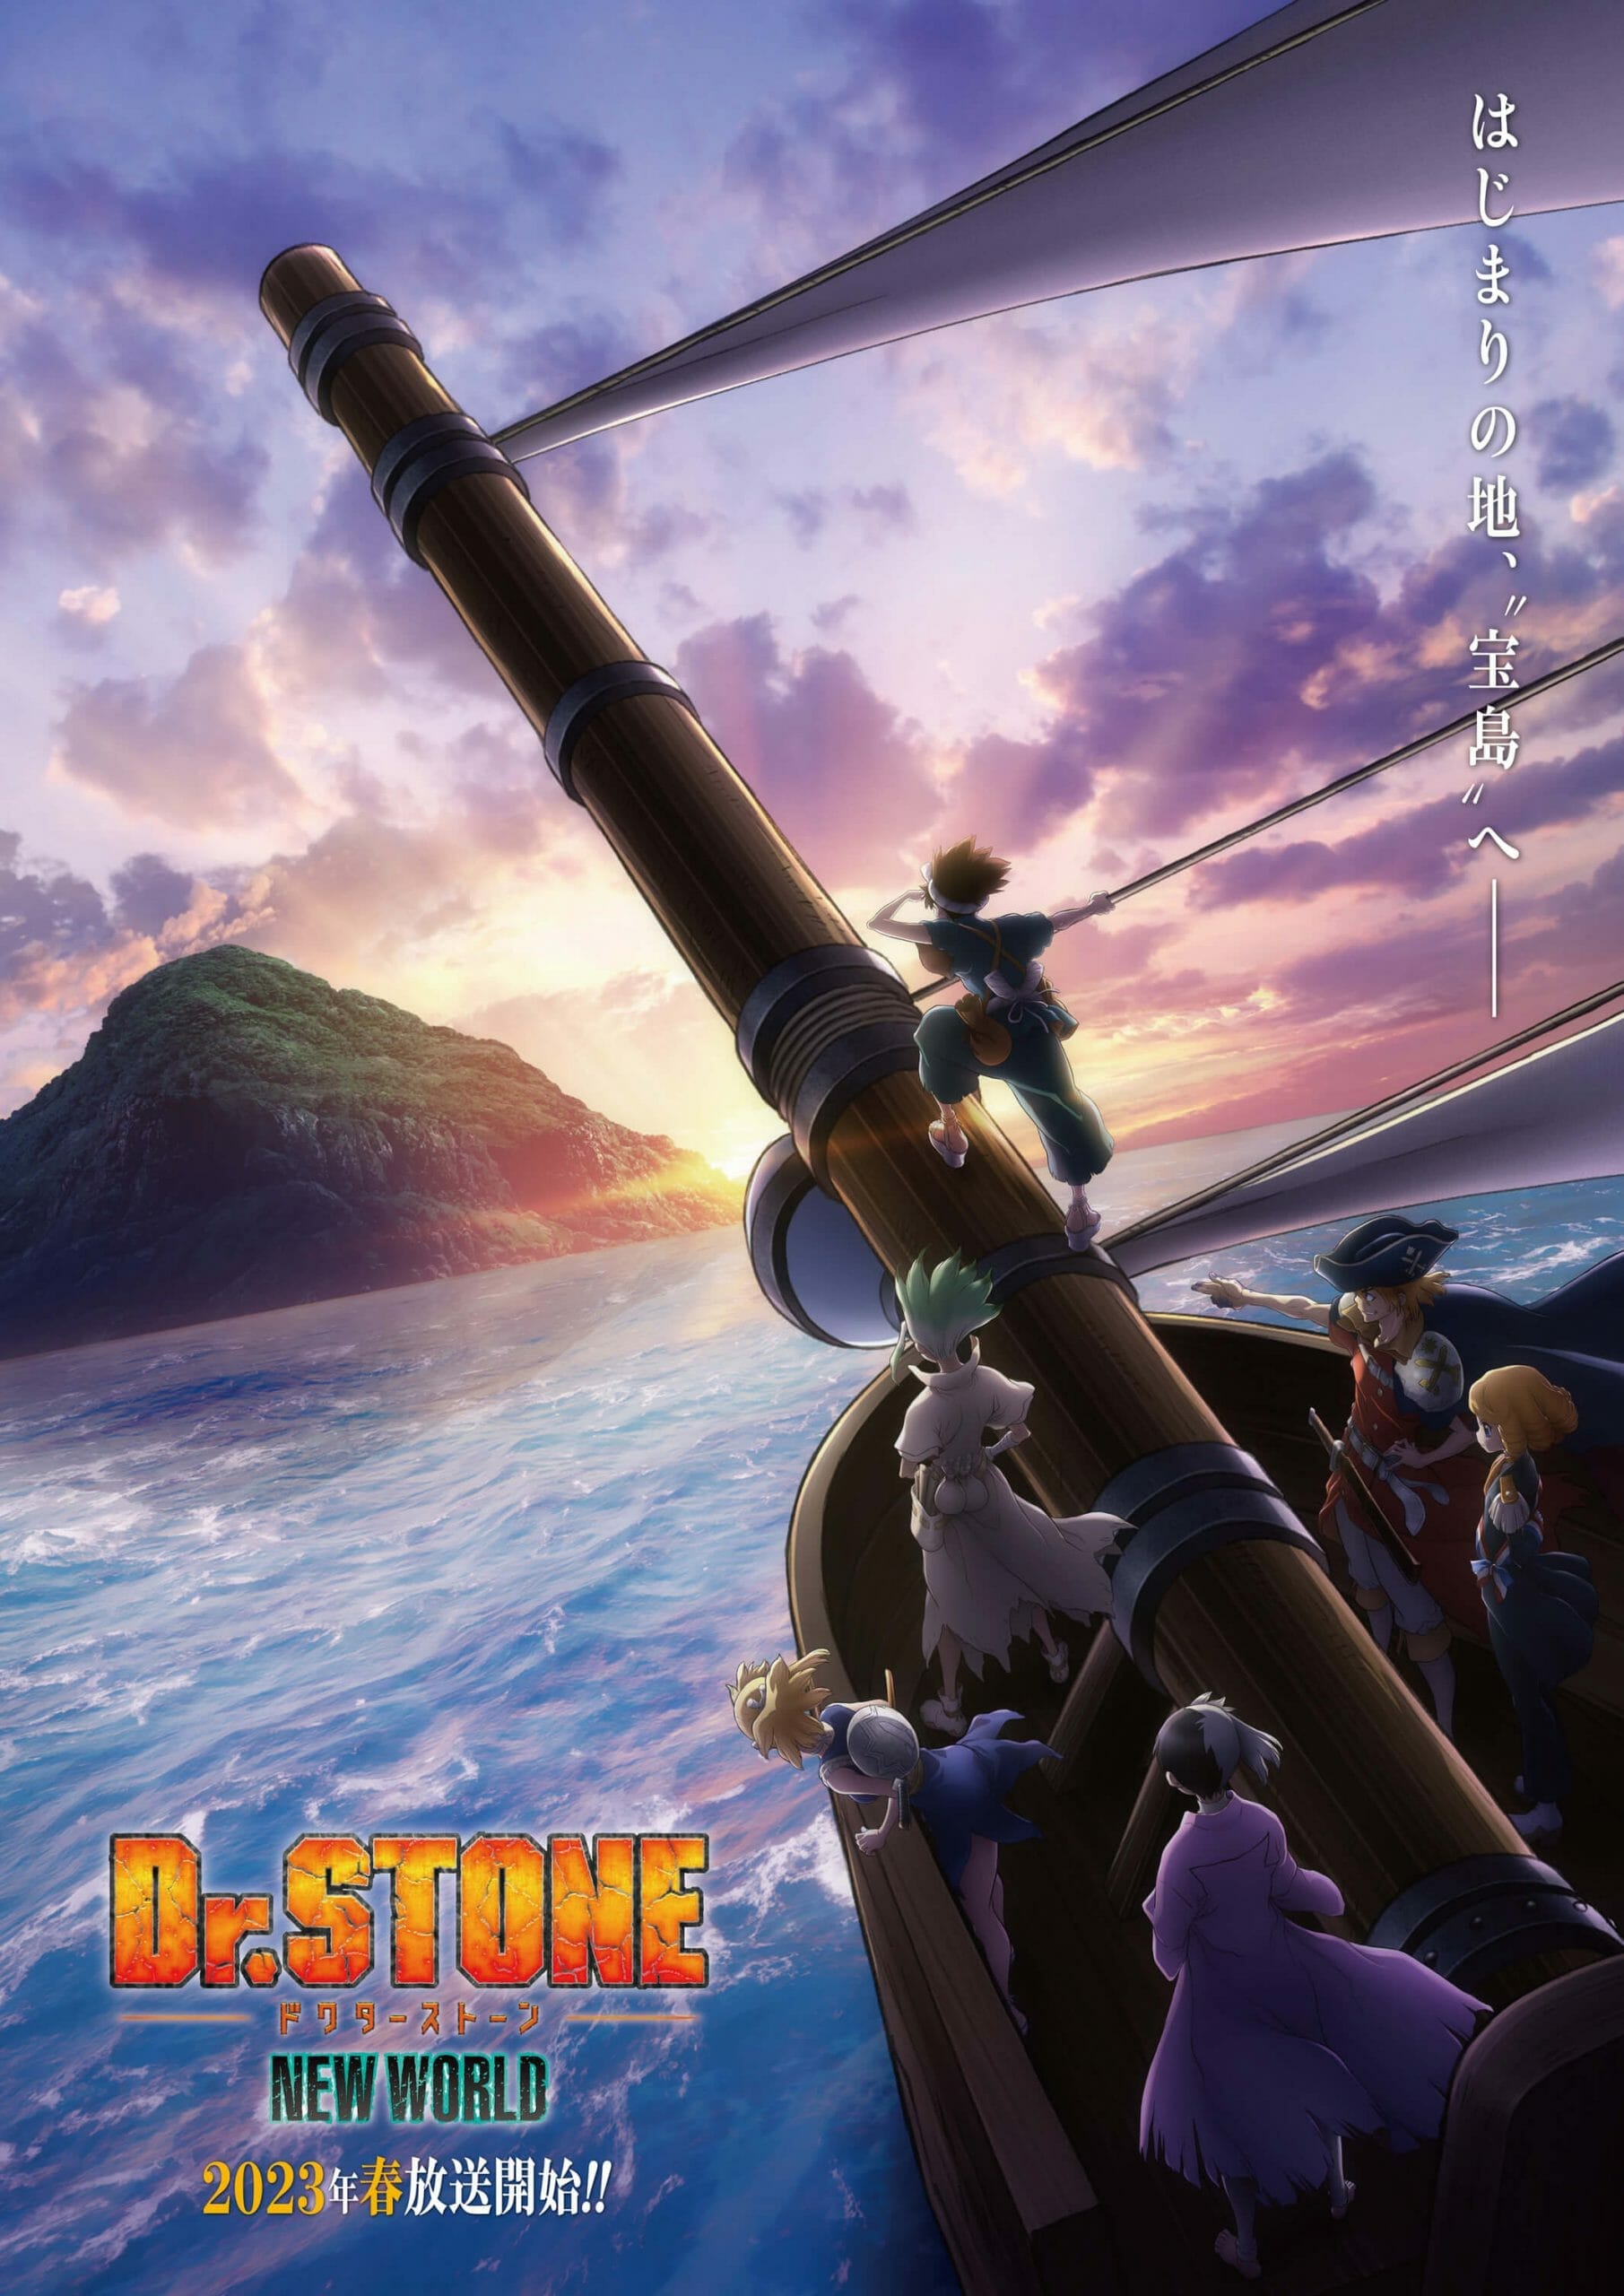 Dr. Stone's New World character poster showing a boat approaching an island